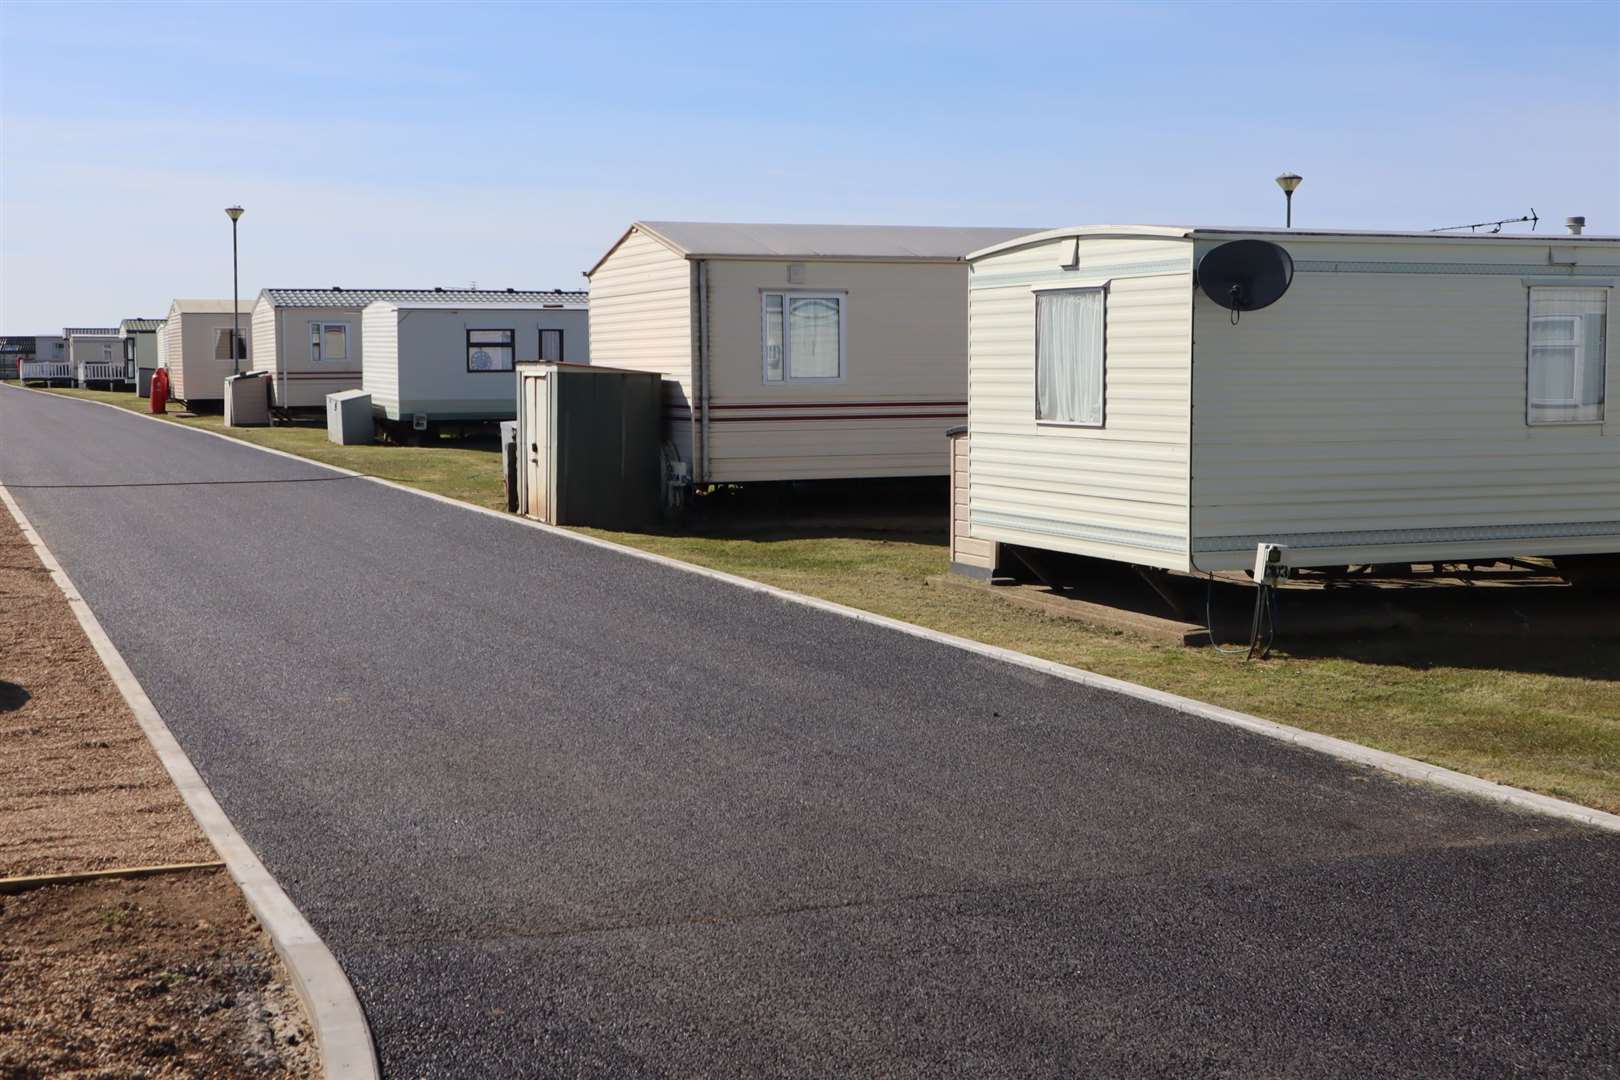 New road leading to the Humming Bird development at Golden Leas holiday park, Minster, Sheppey